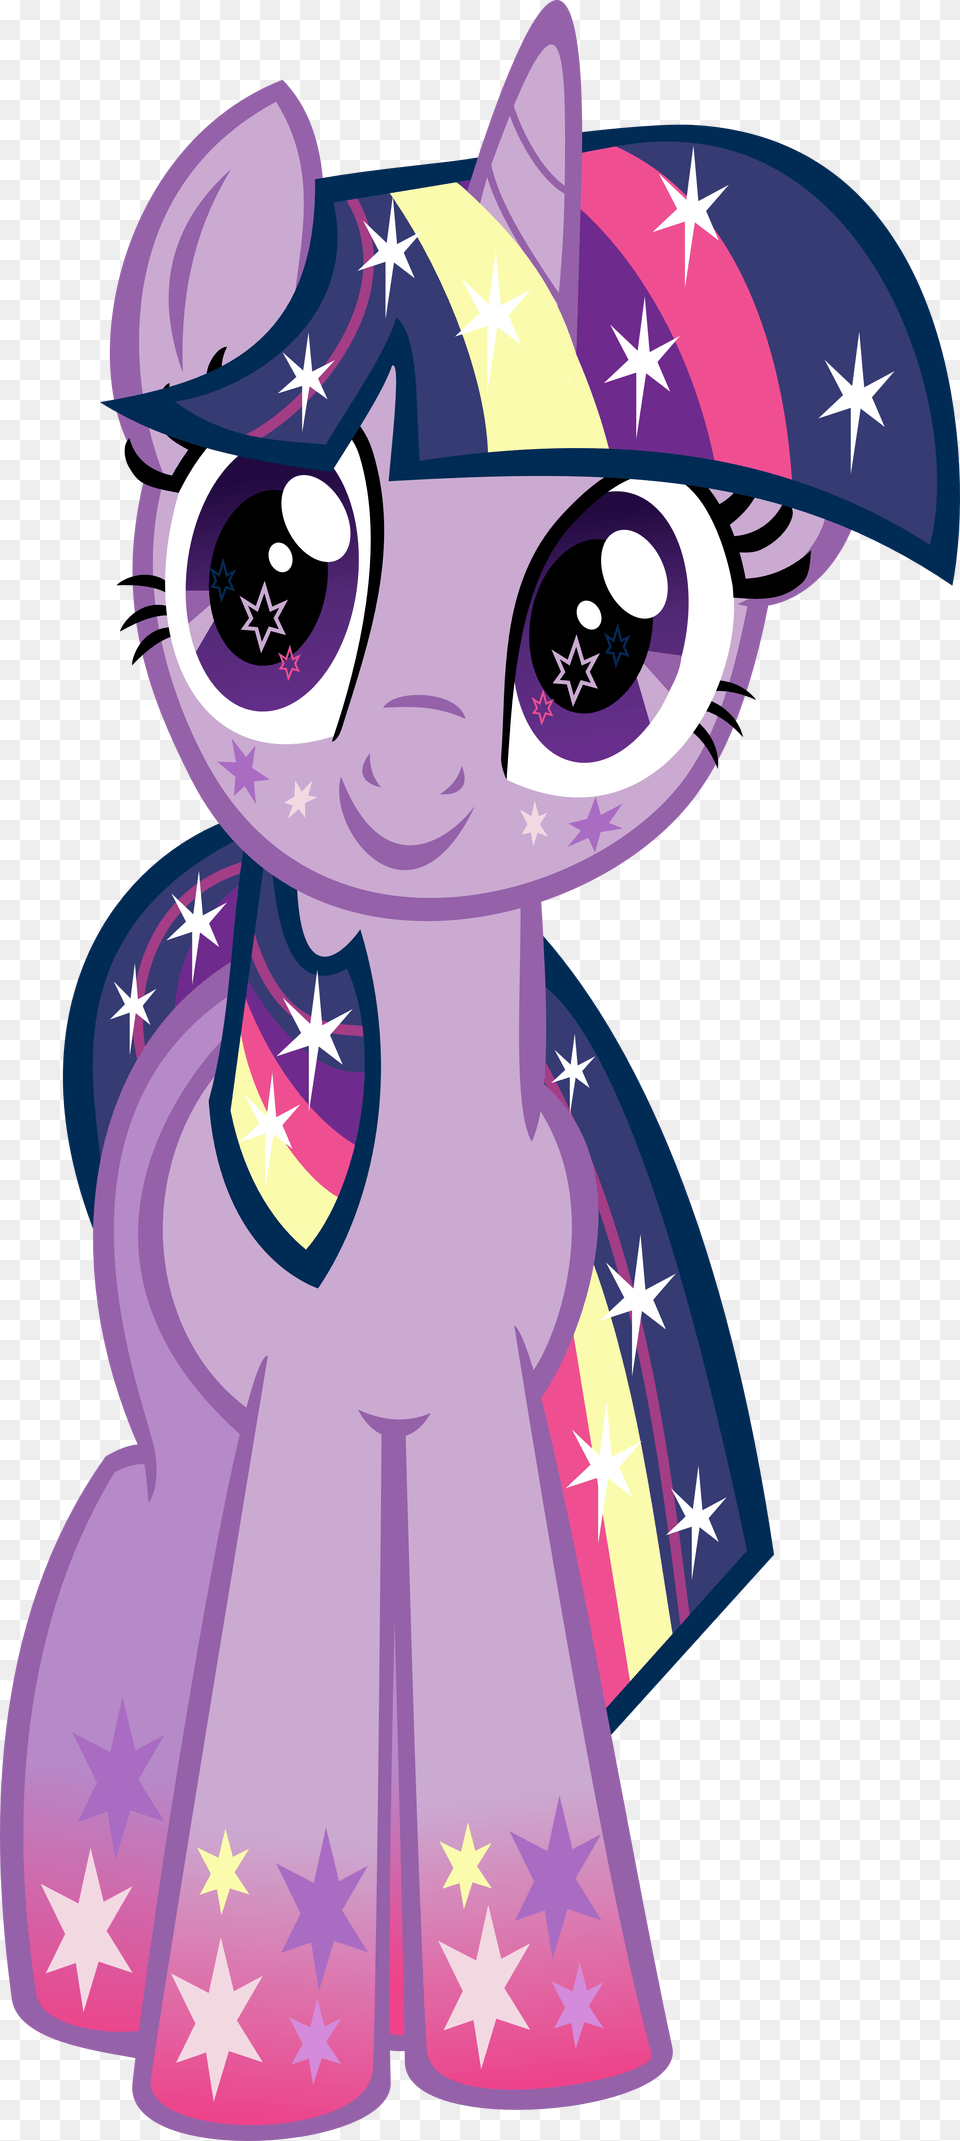 Rainbowfied Twilight Sparkle Hug By Meganlovesangrybirds Rainbowfied Twilight Sparkle, Purple, Book, Comics, Publication Free Png